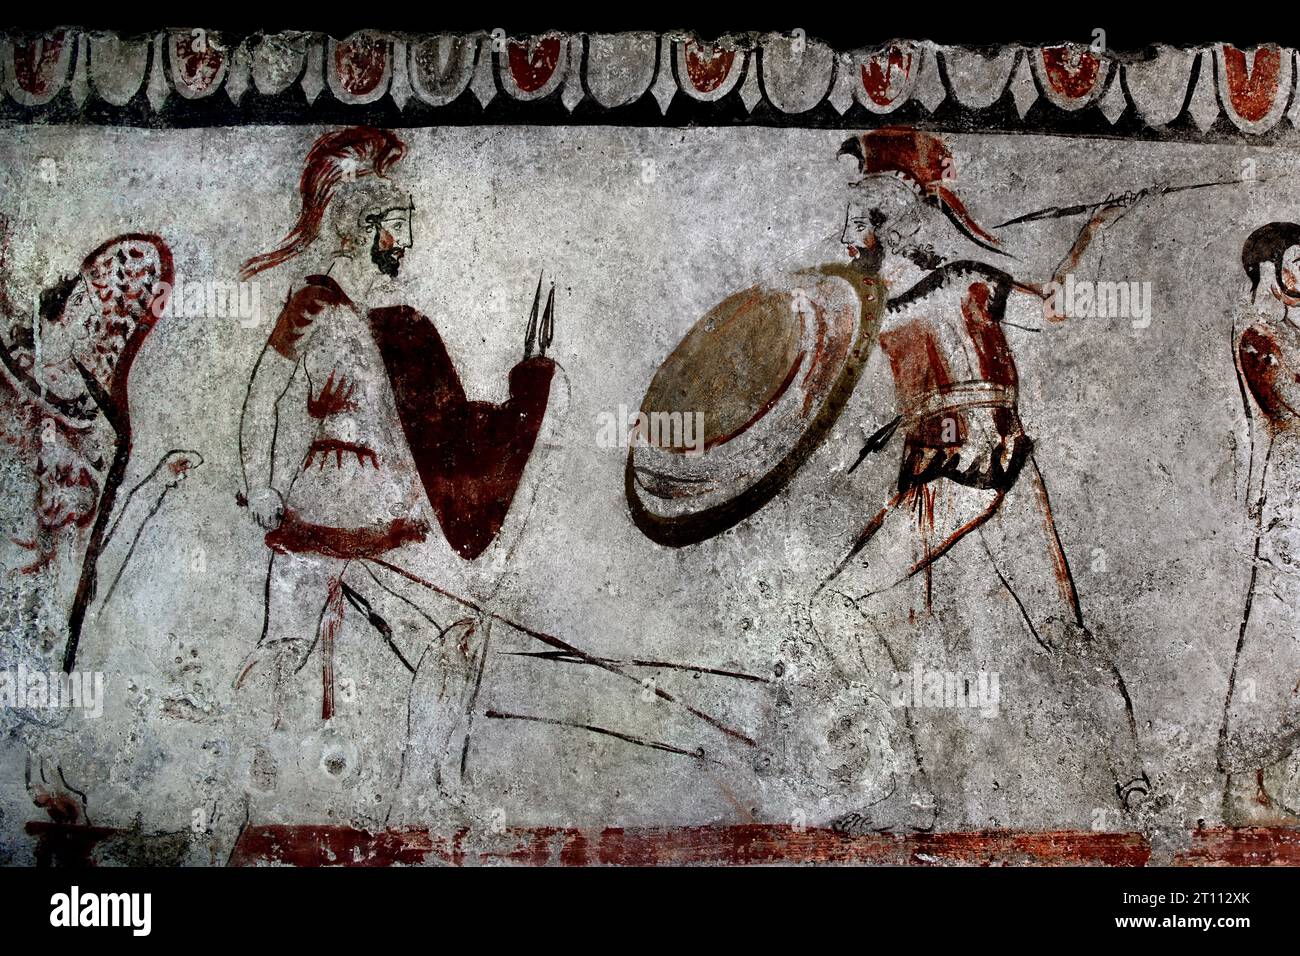 Warriors with a spear and a shield Lucanian fresco from the 4th century BC, from the Tomb of the Horseman, Lucanian fresco tomb,  The ruins of Paestum are famous for their three ancient Greek temples in the Doric order  550 to 450 BC Stock Photo